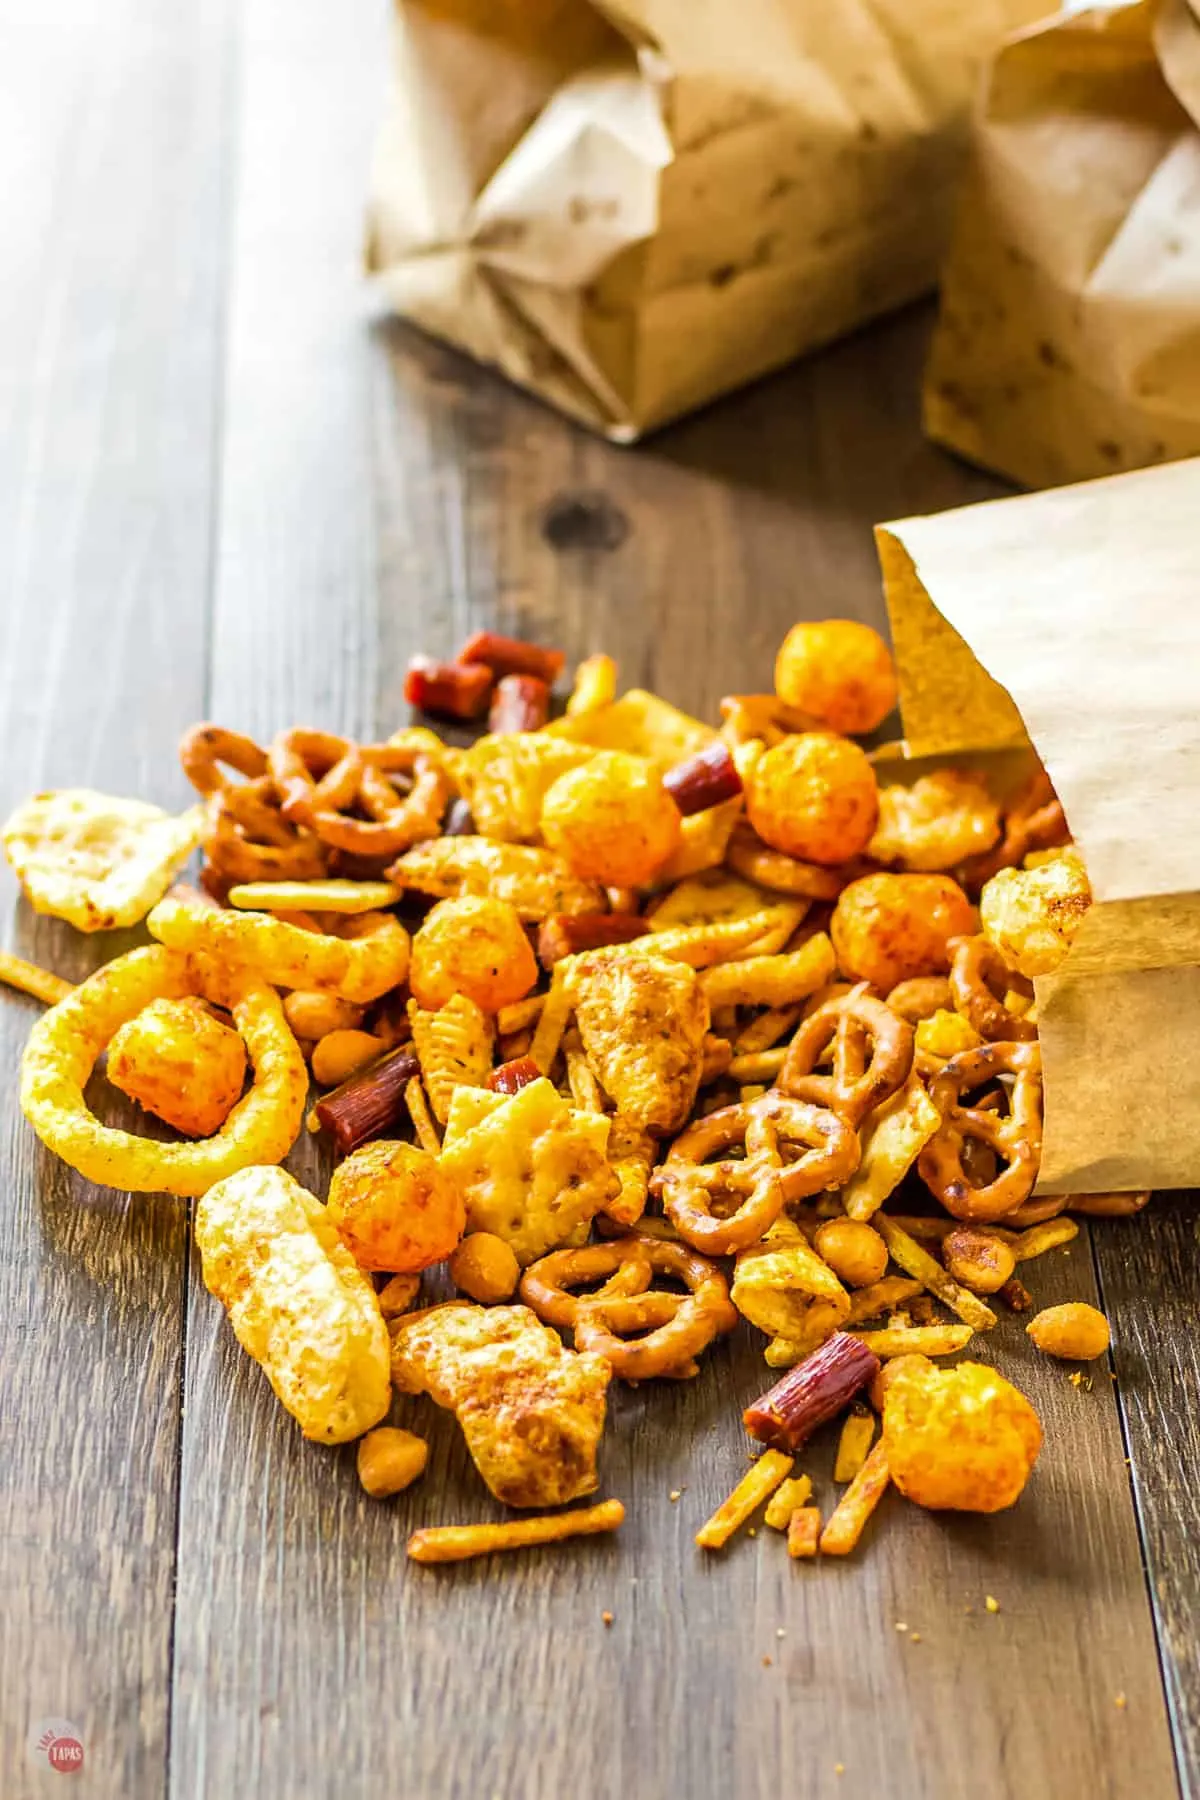 Cheetos Pretzels Are the Savory Snack We've Been Missing